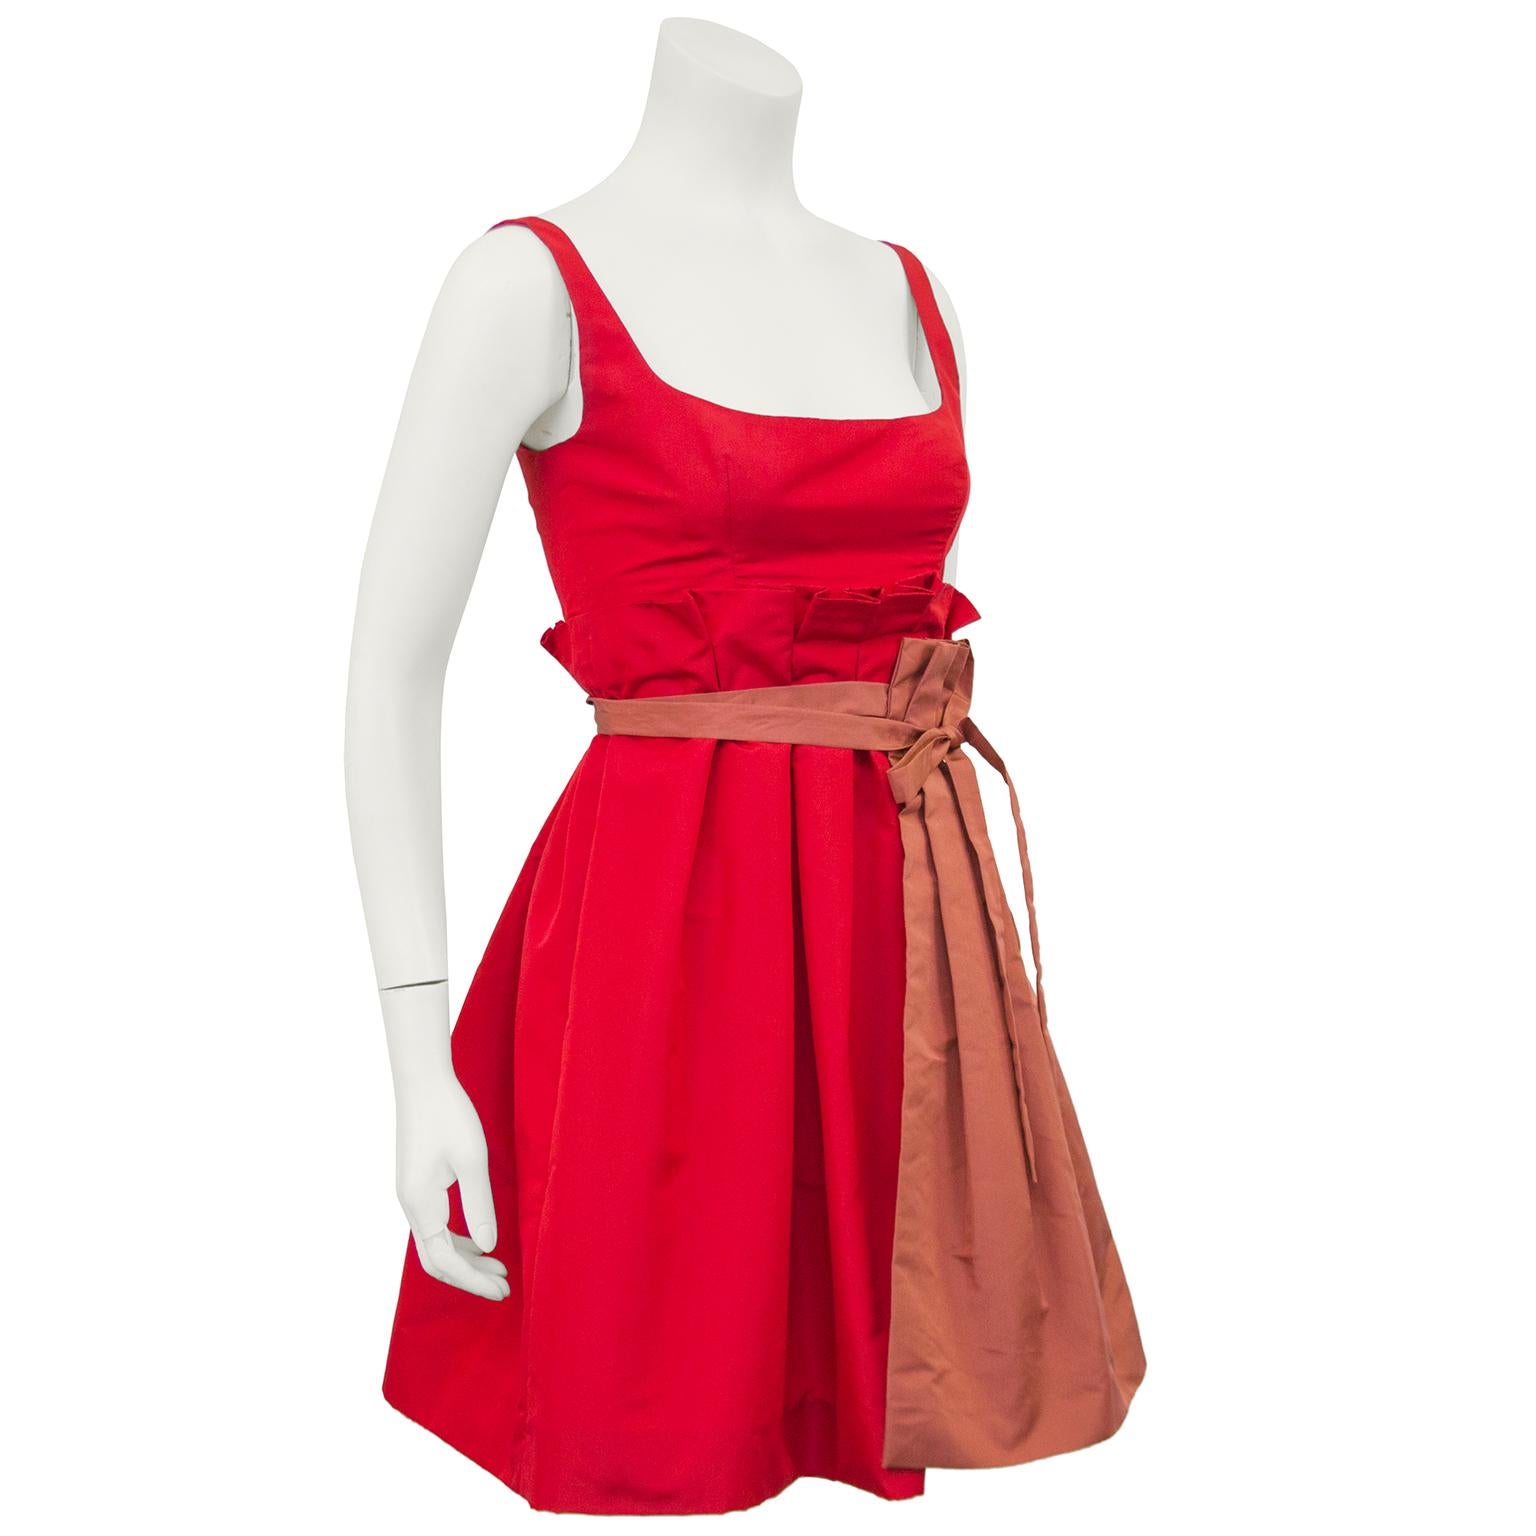 Babydoll style Prada bright red silk taffeta cocktail dress from the 2005 Spring ready-to-wear collection. The U shape bust line is meant to show off cleavage while the empire waistline keeps this dress fresh and young. Removable matching rust red